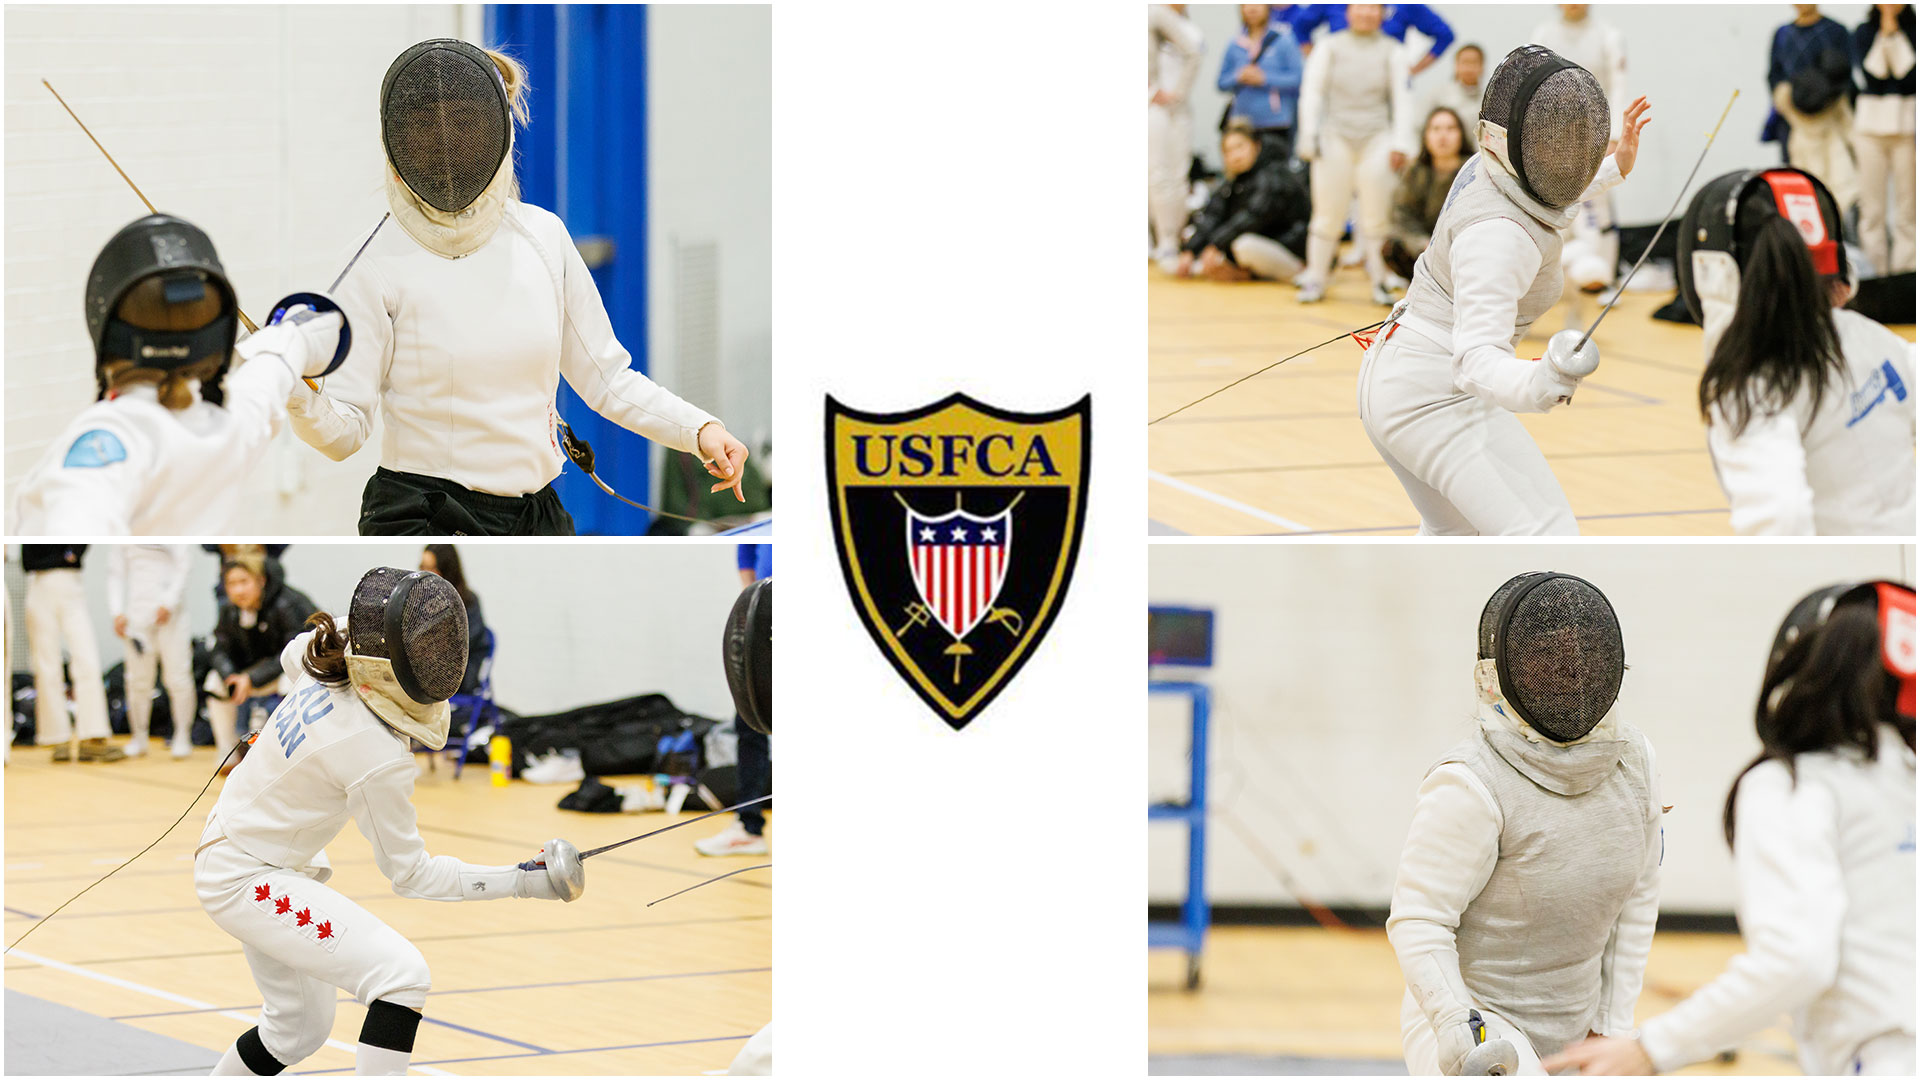 Four Blue fencers were named to the USFCA Division III All-American teams.